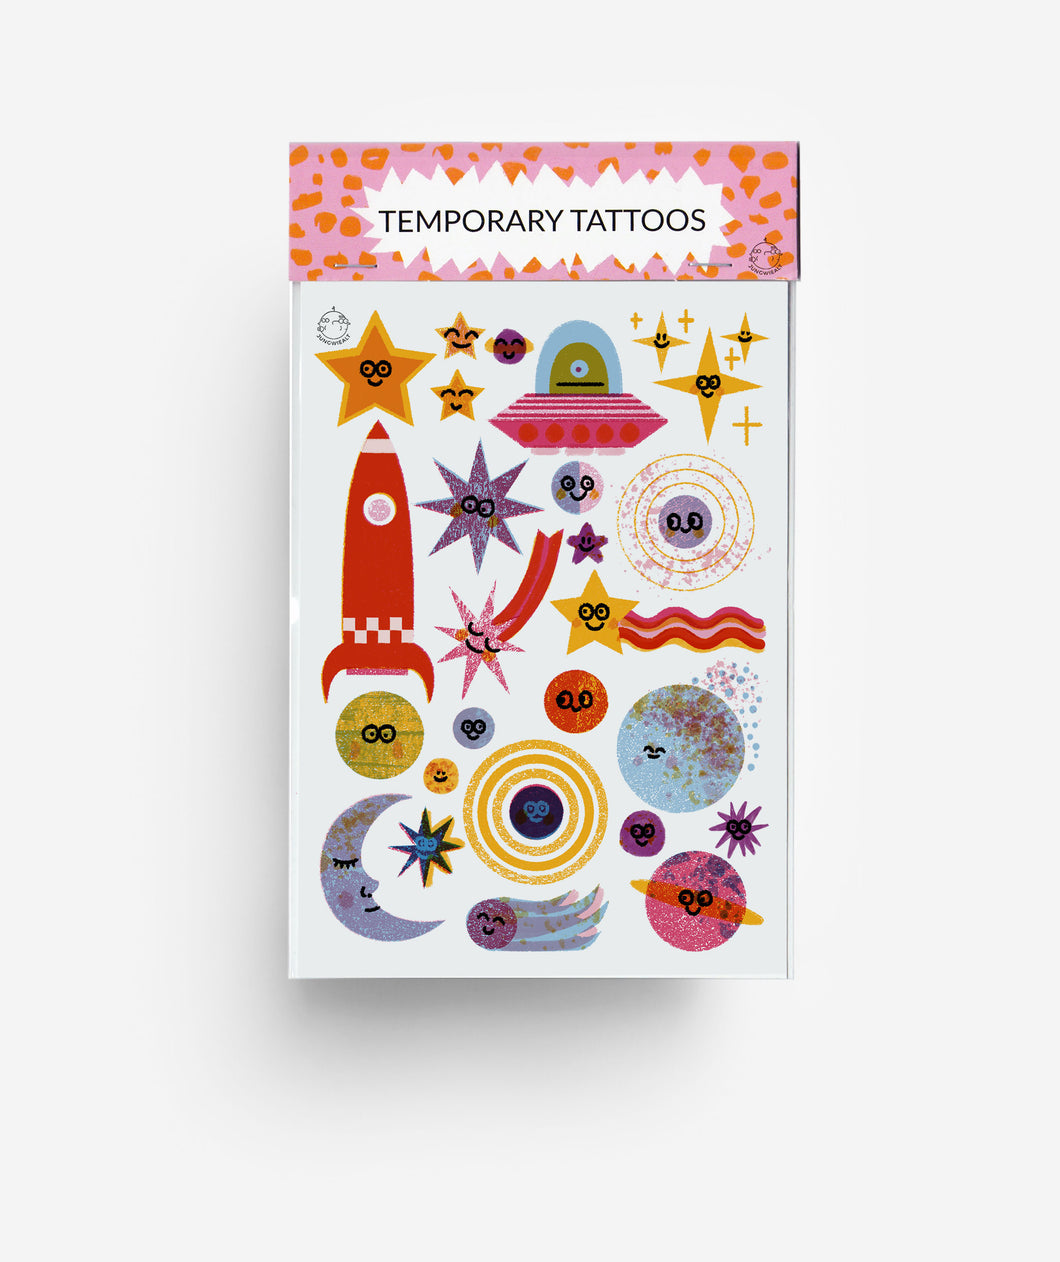 modern Space Temporary Tattoos, showing cute space related characters and planets